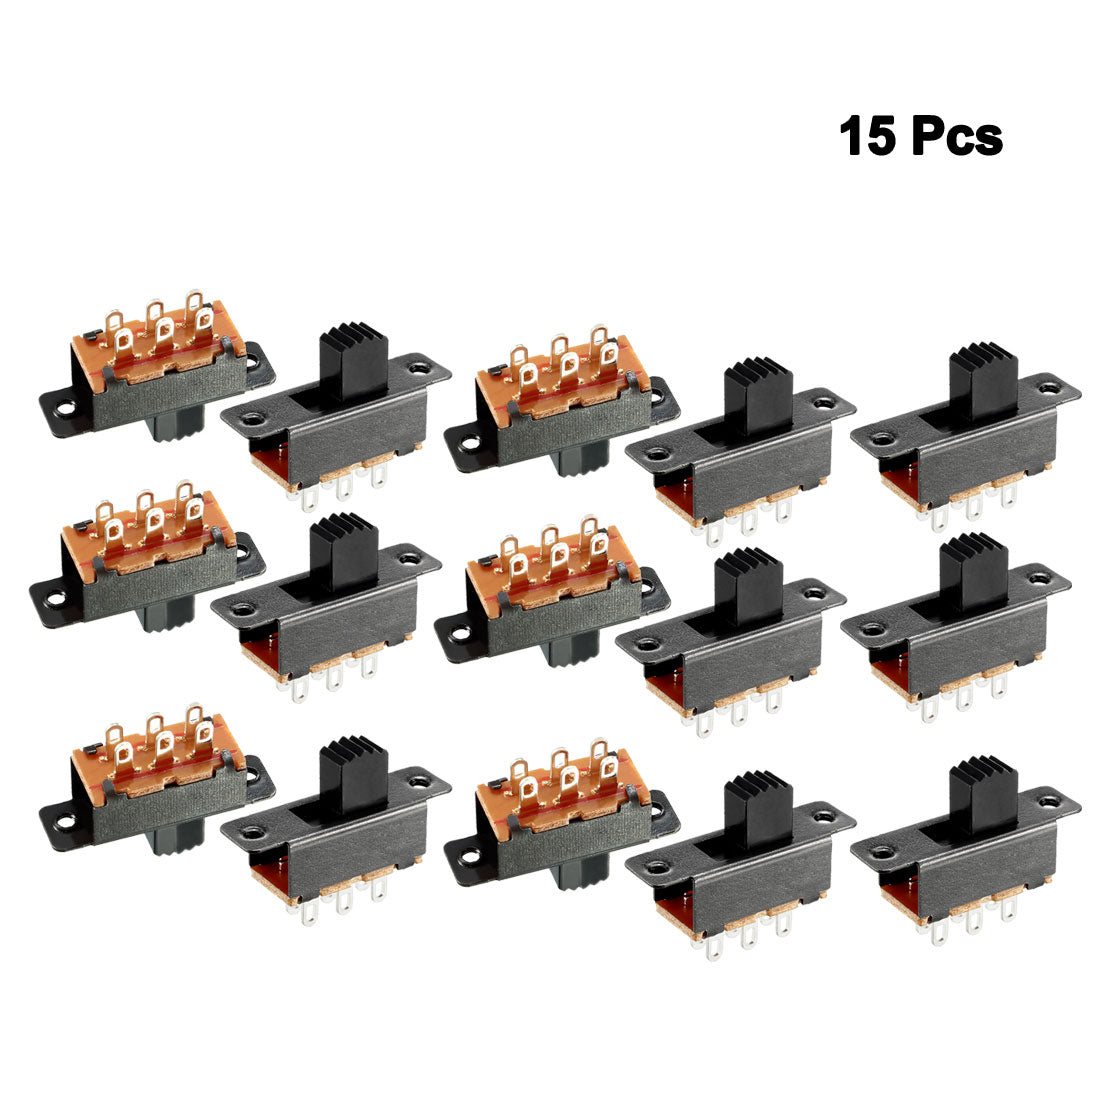 uxcell Uxcell 15Pcs 7mm Vertical Slide Switch DPDT 6 Terminals PCB Panel Latching